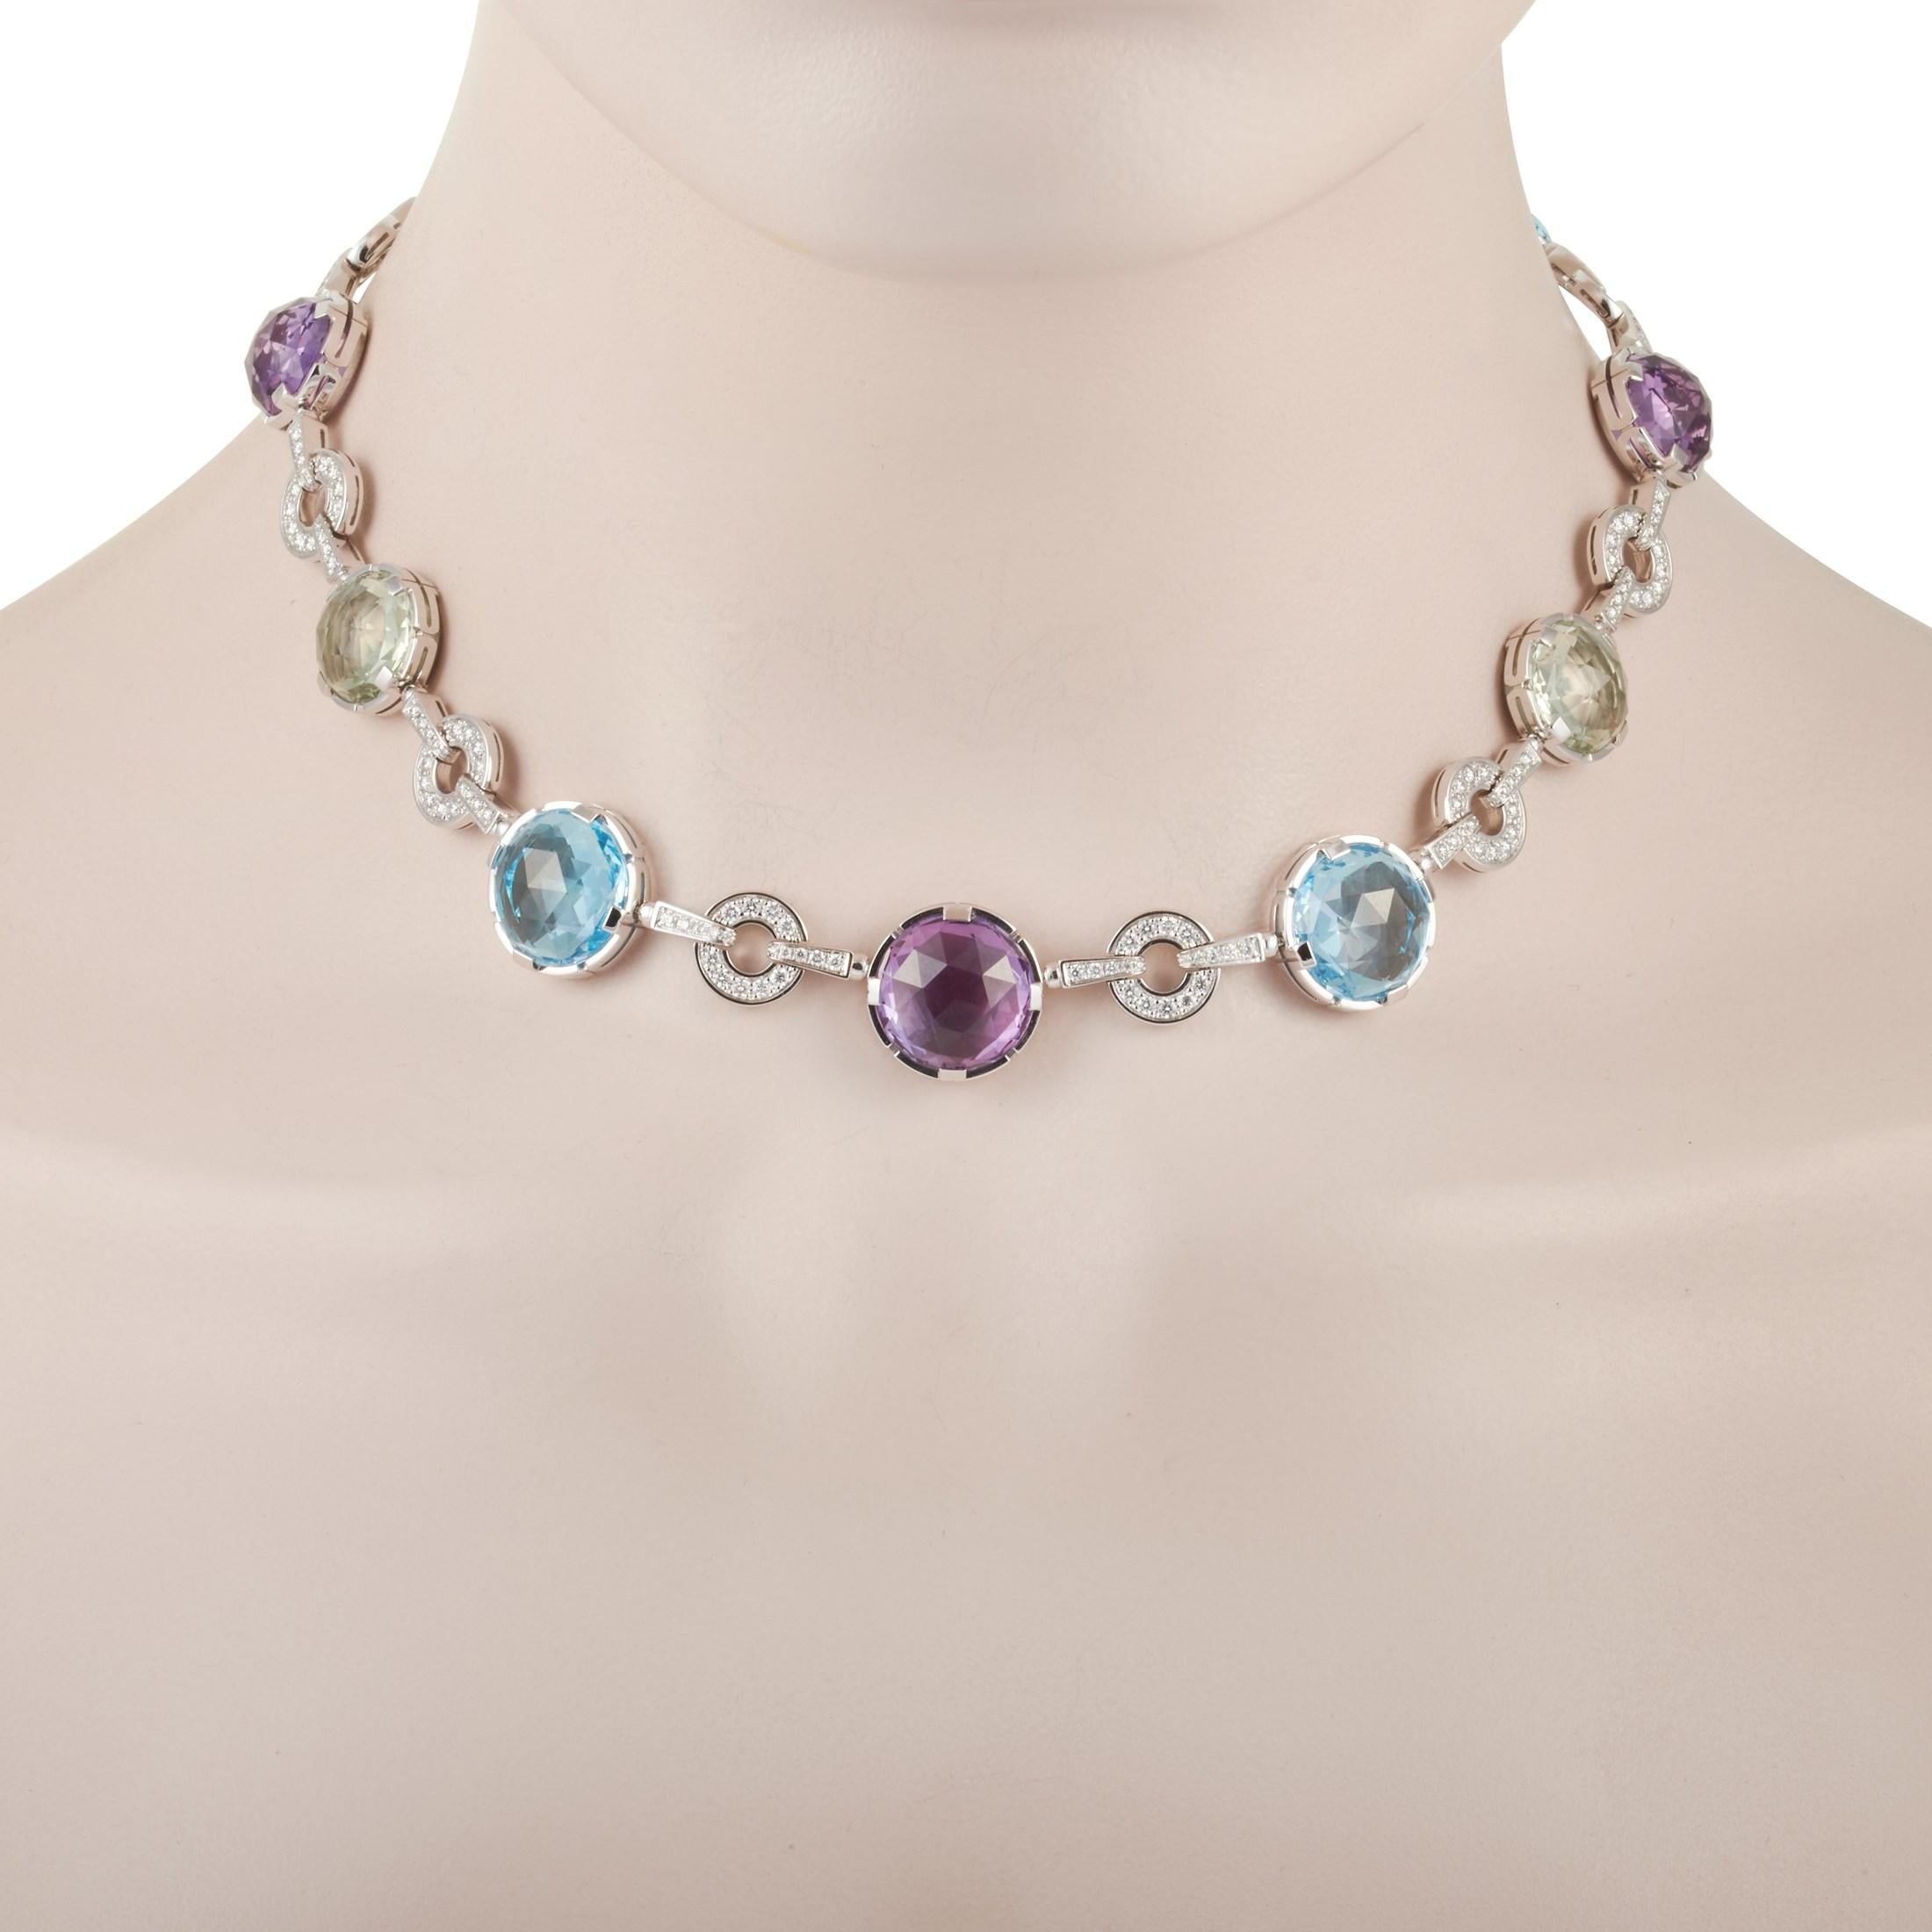 This Bvlgari 18K White Gold 2.60 ct Diamond, Topaz and Amethyst Parentesi Cocktail Necklace is a statement piece that will have people talking. It features an 18K White Gold chain that is 15 inches in length and is punctuated with Amethyst, Topaz,